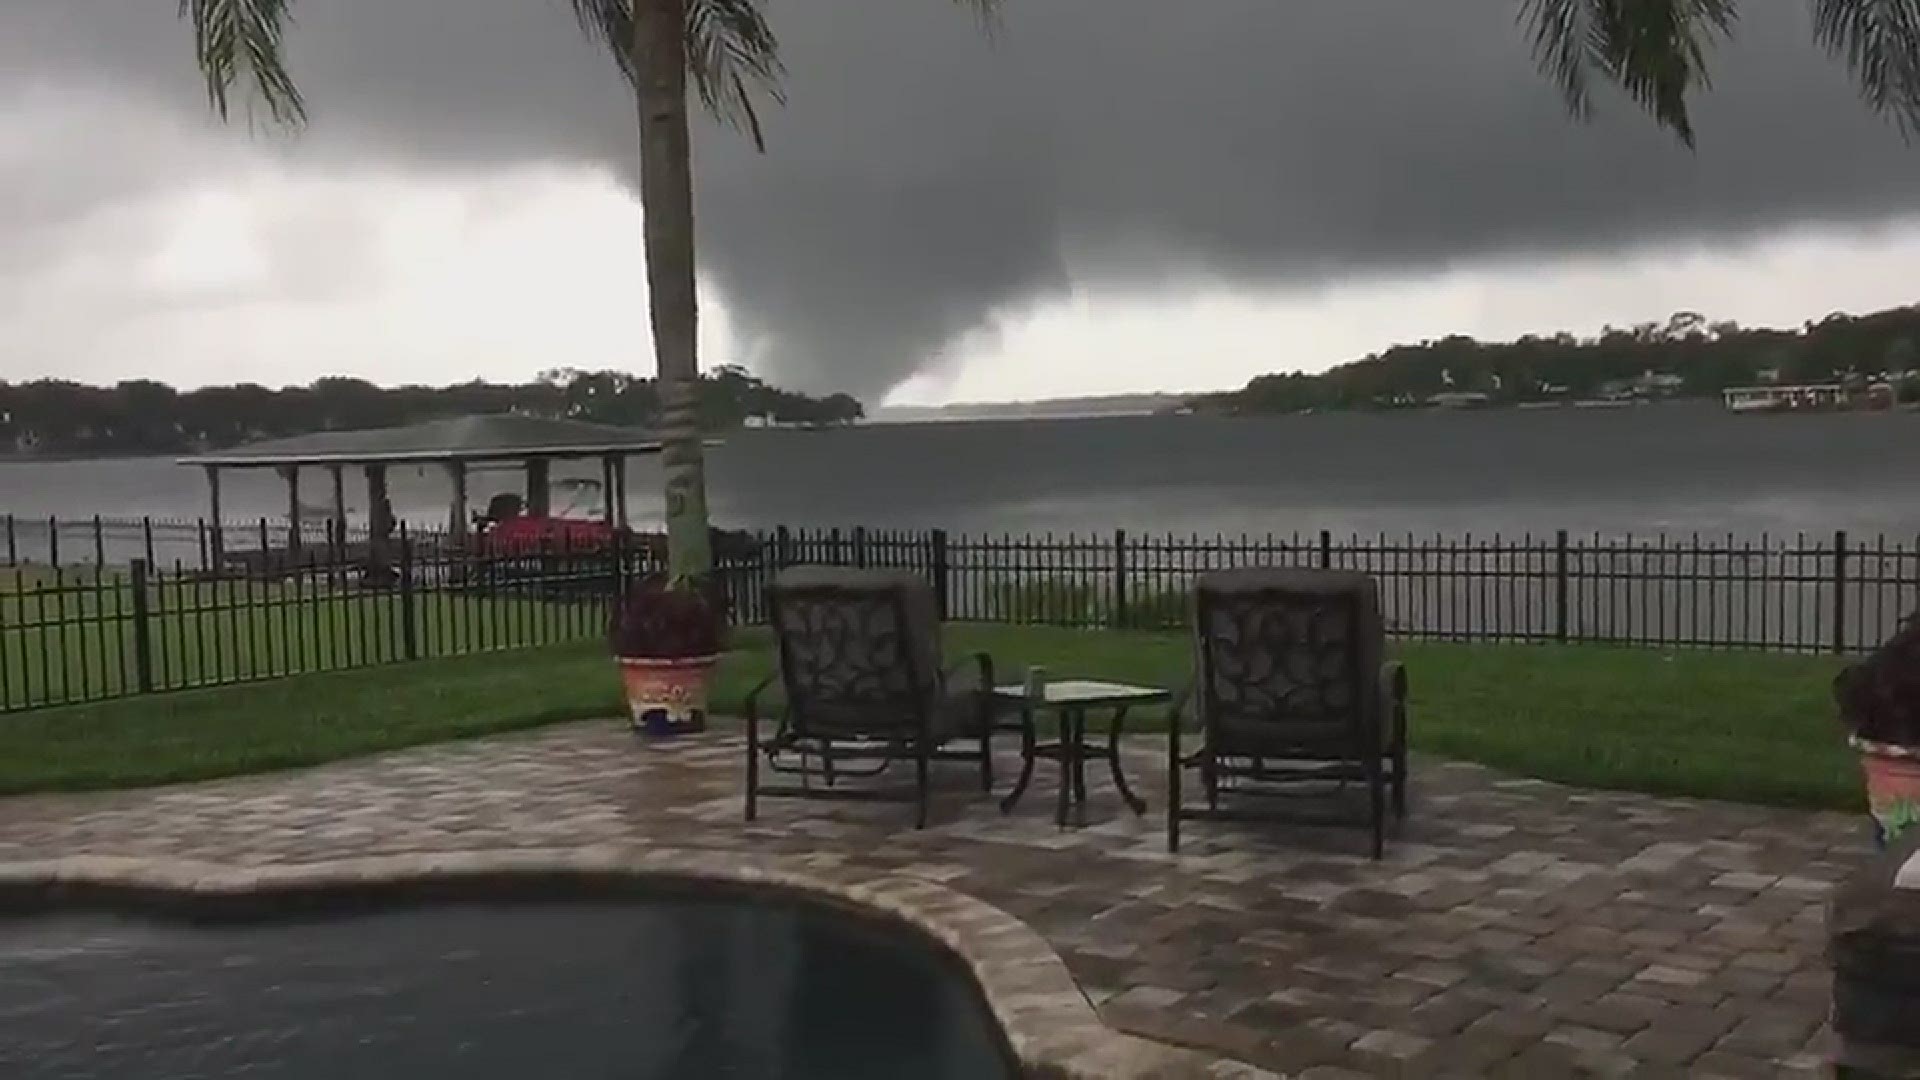 Incredible video captured of a tornado moving through the Lake Conway area in Orlando Saturday.